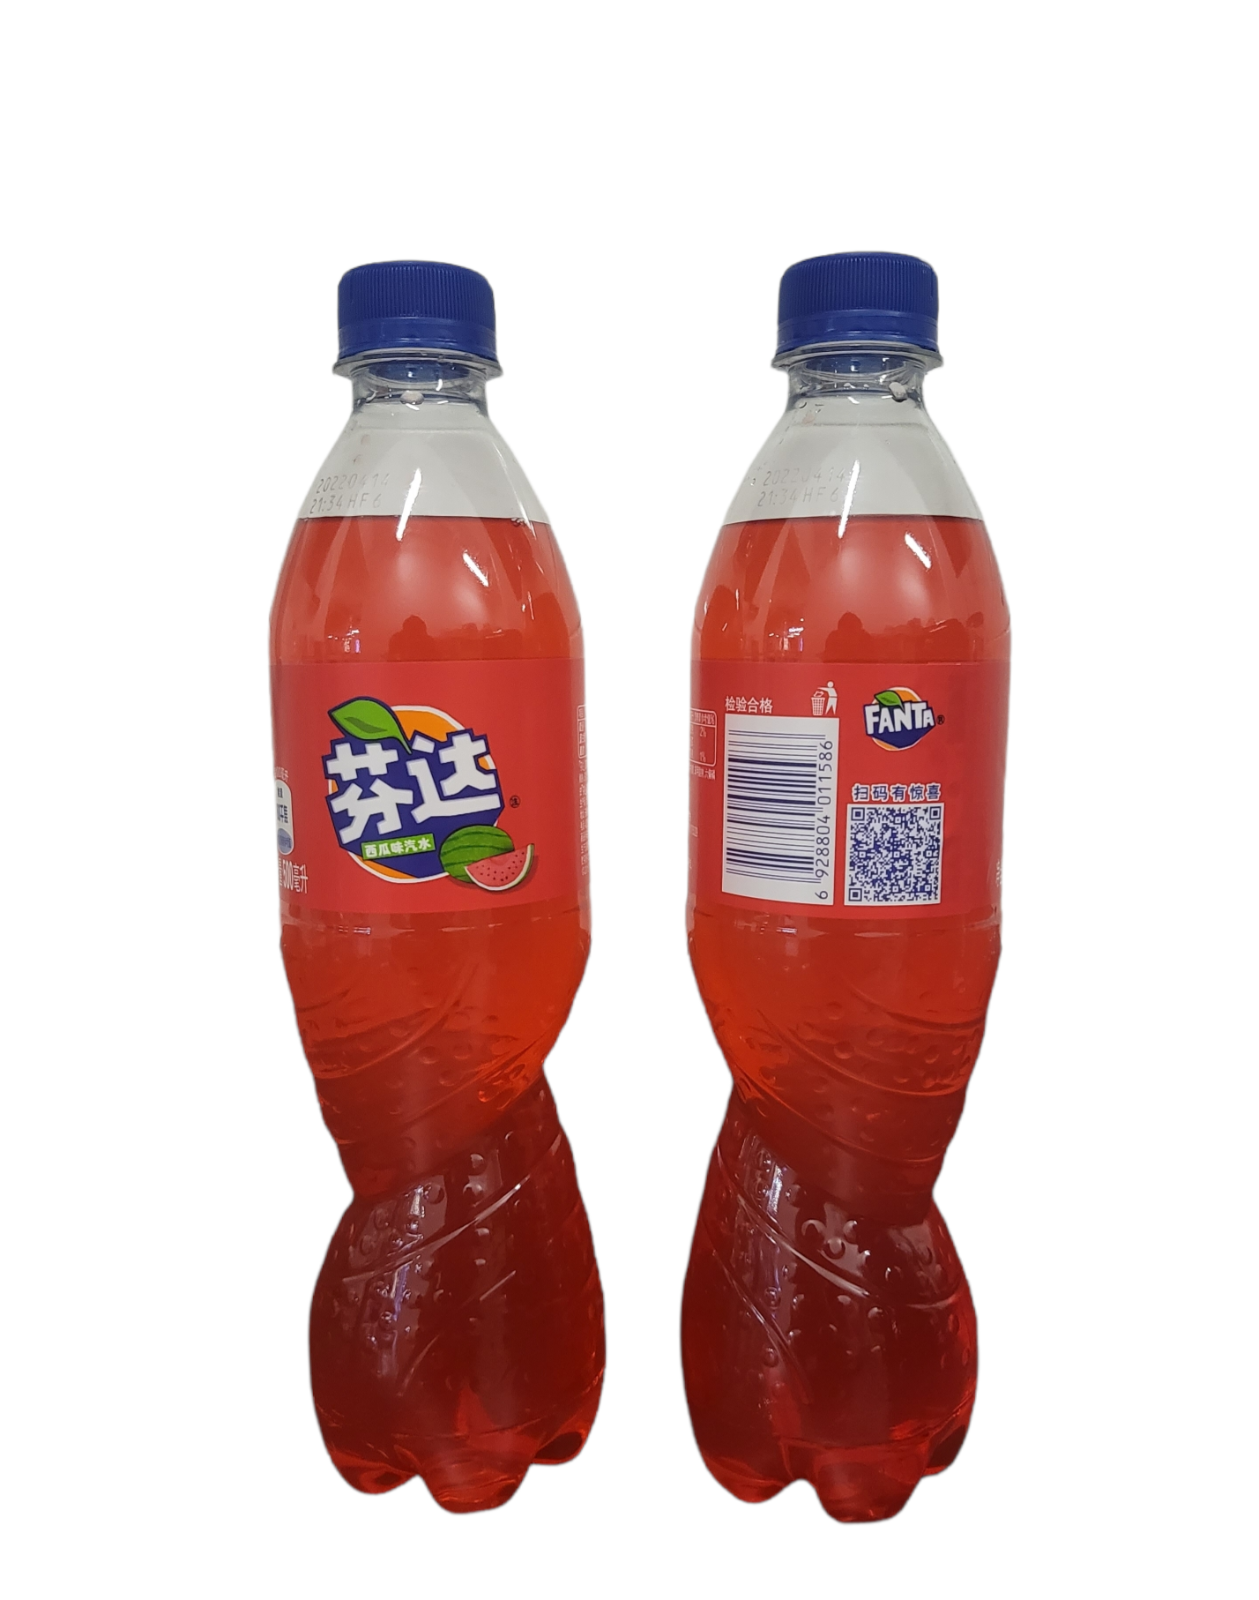 2 Exotic Fanta China Watermelon Soft Drink 500ml Each Bottle - Free Shipping - $26.13